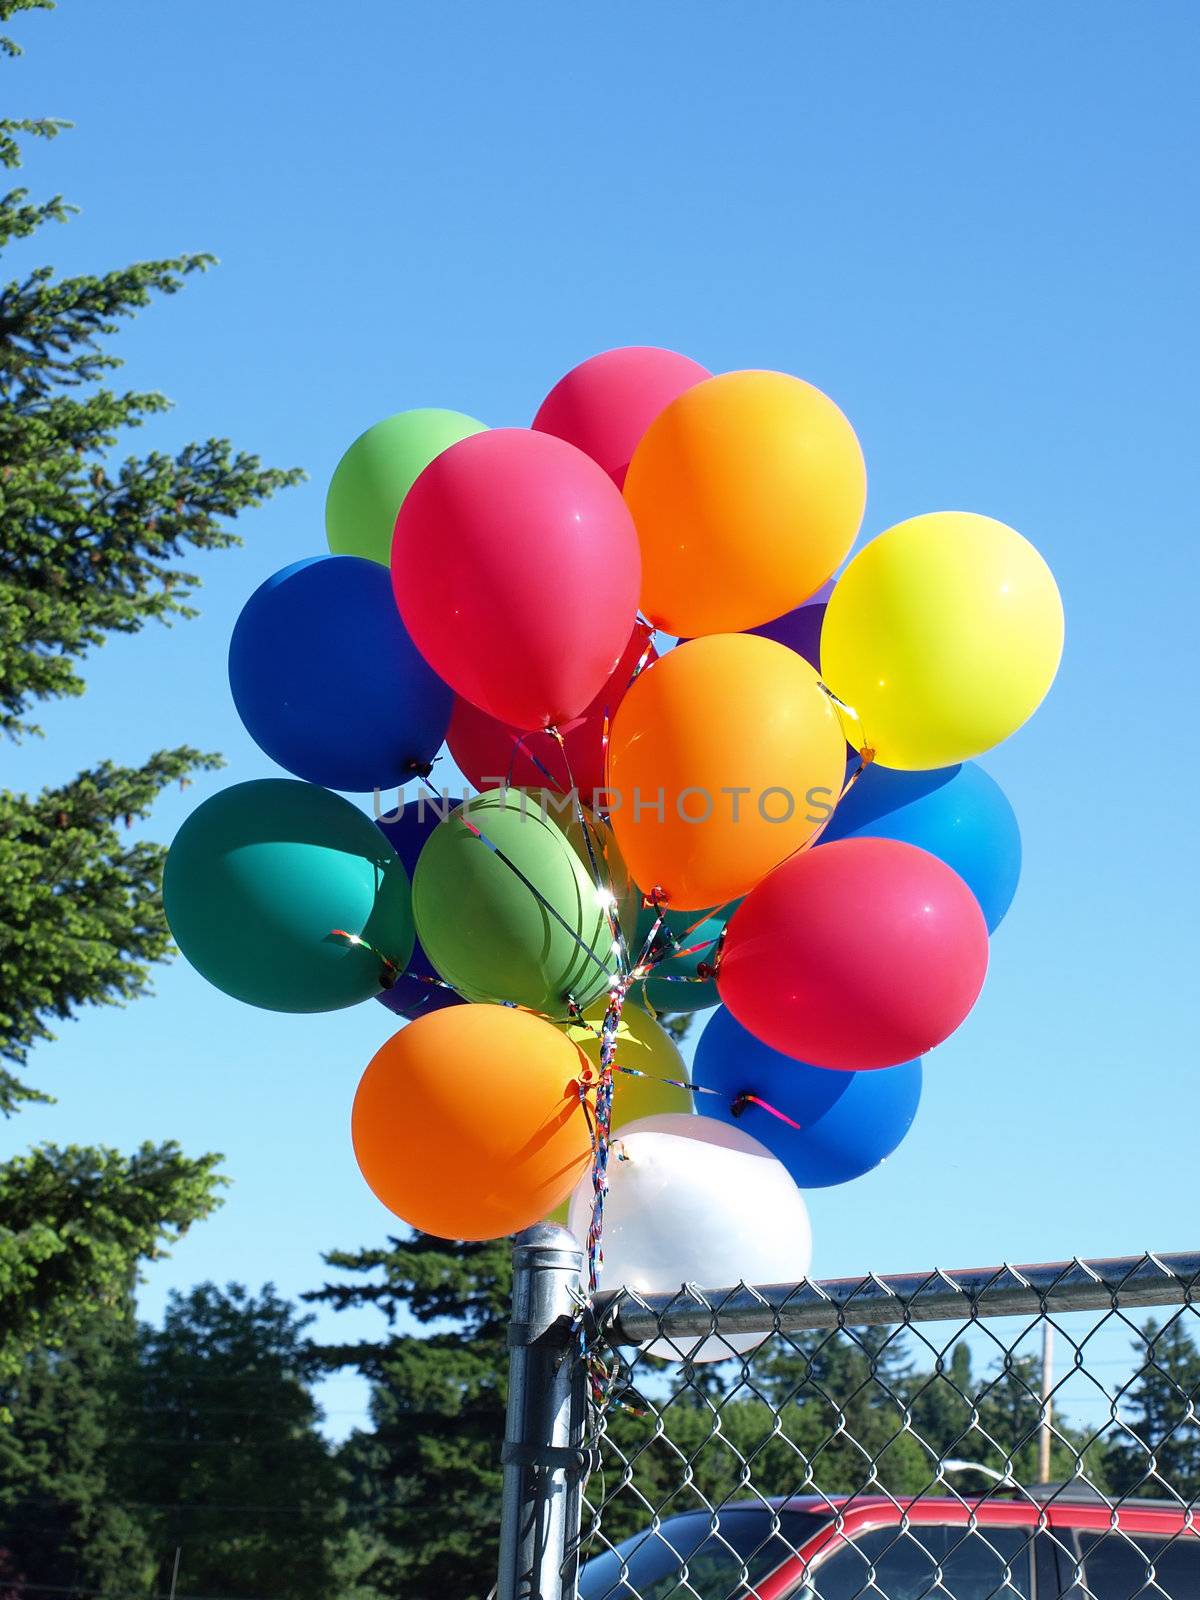 A bouquet of colorful balloons floating over a fence